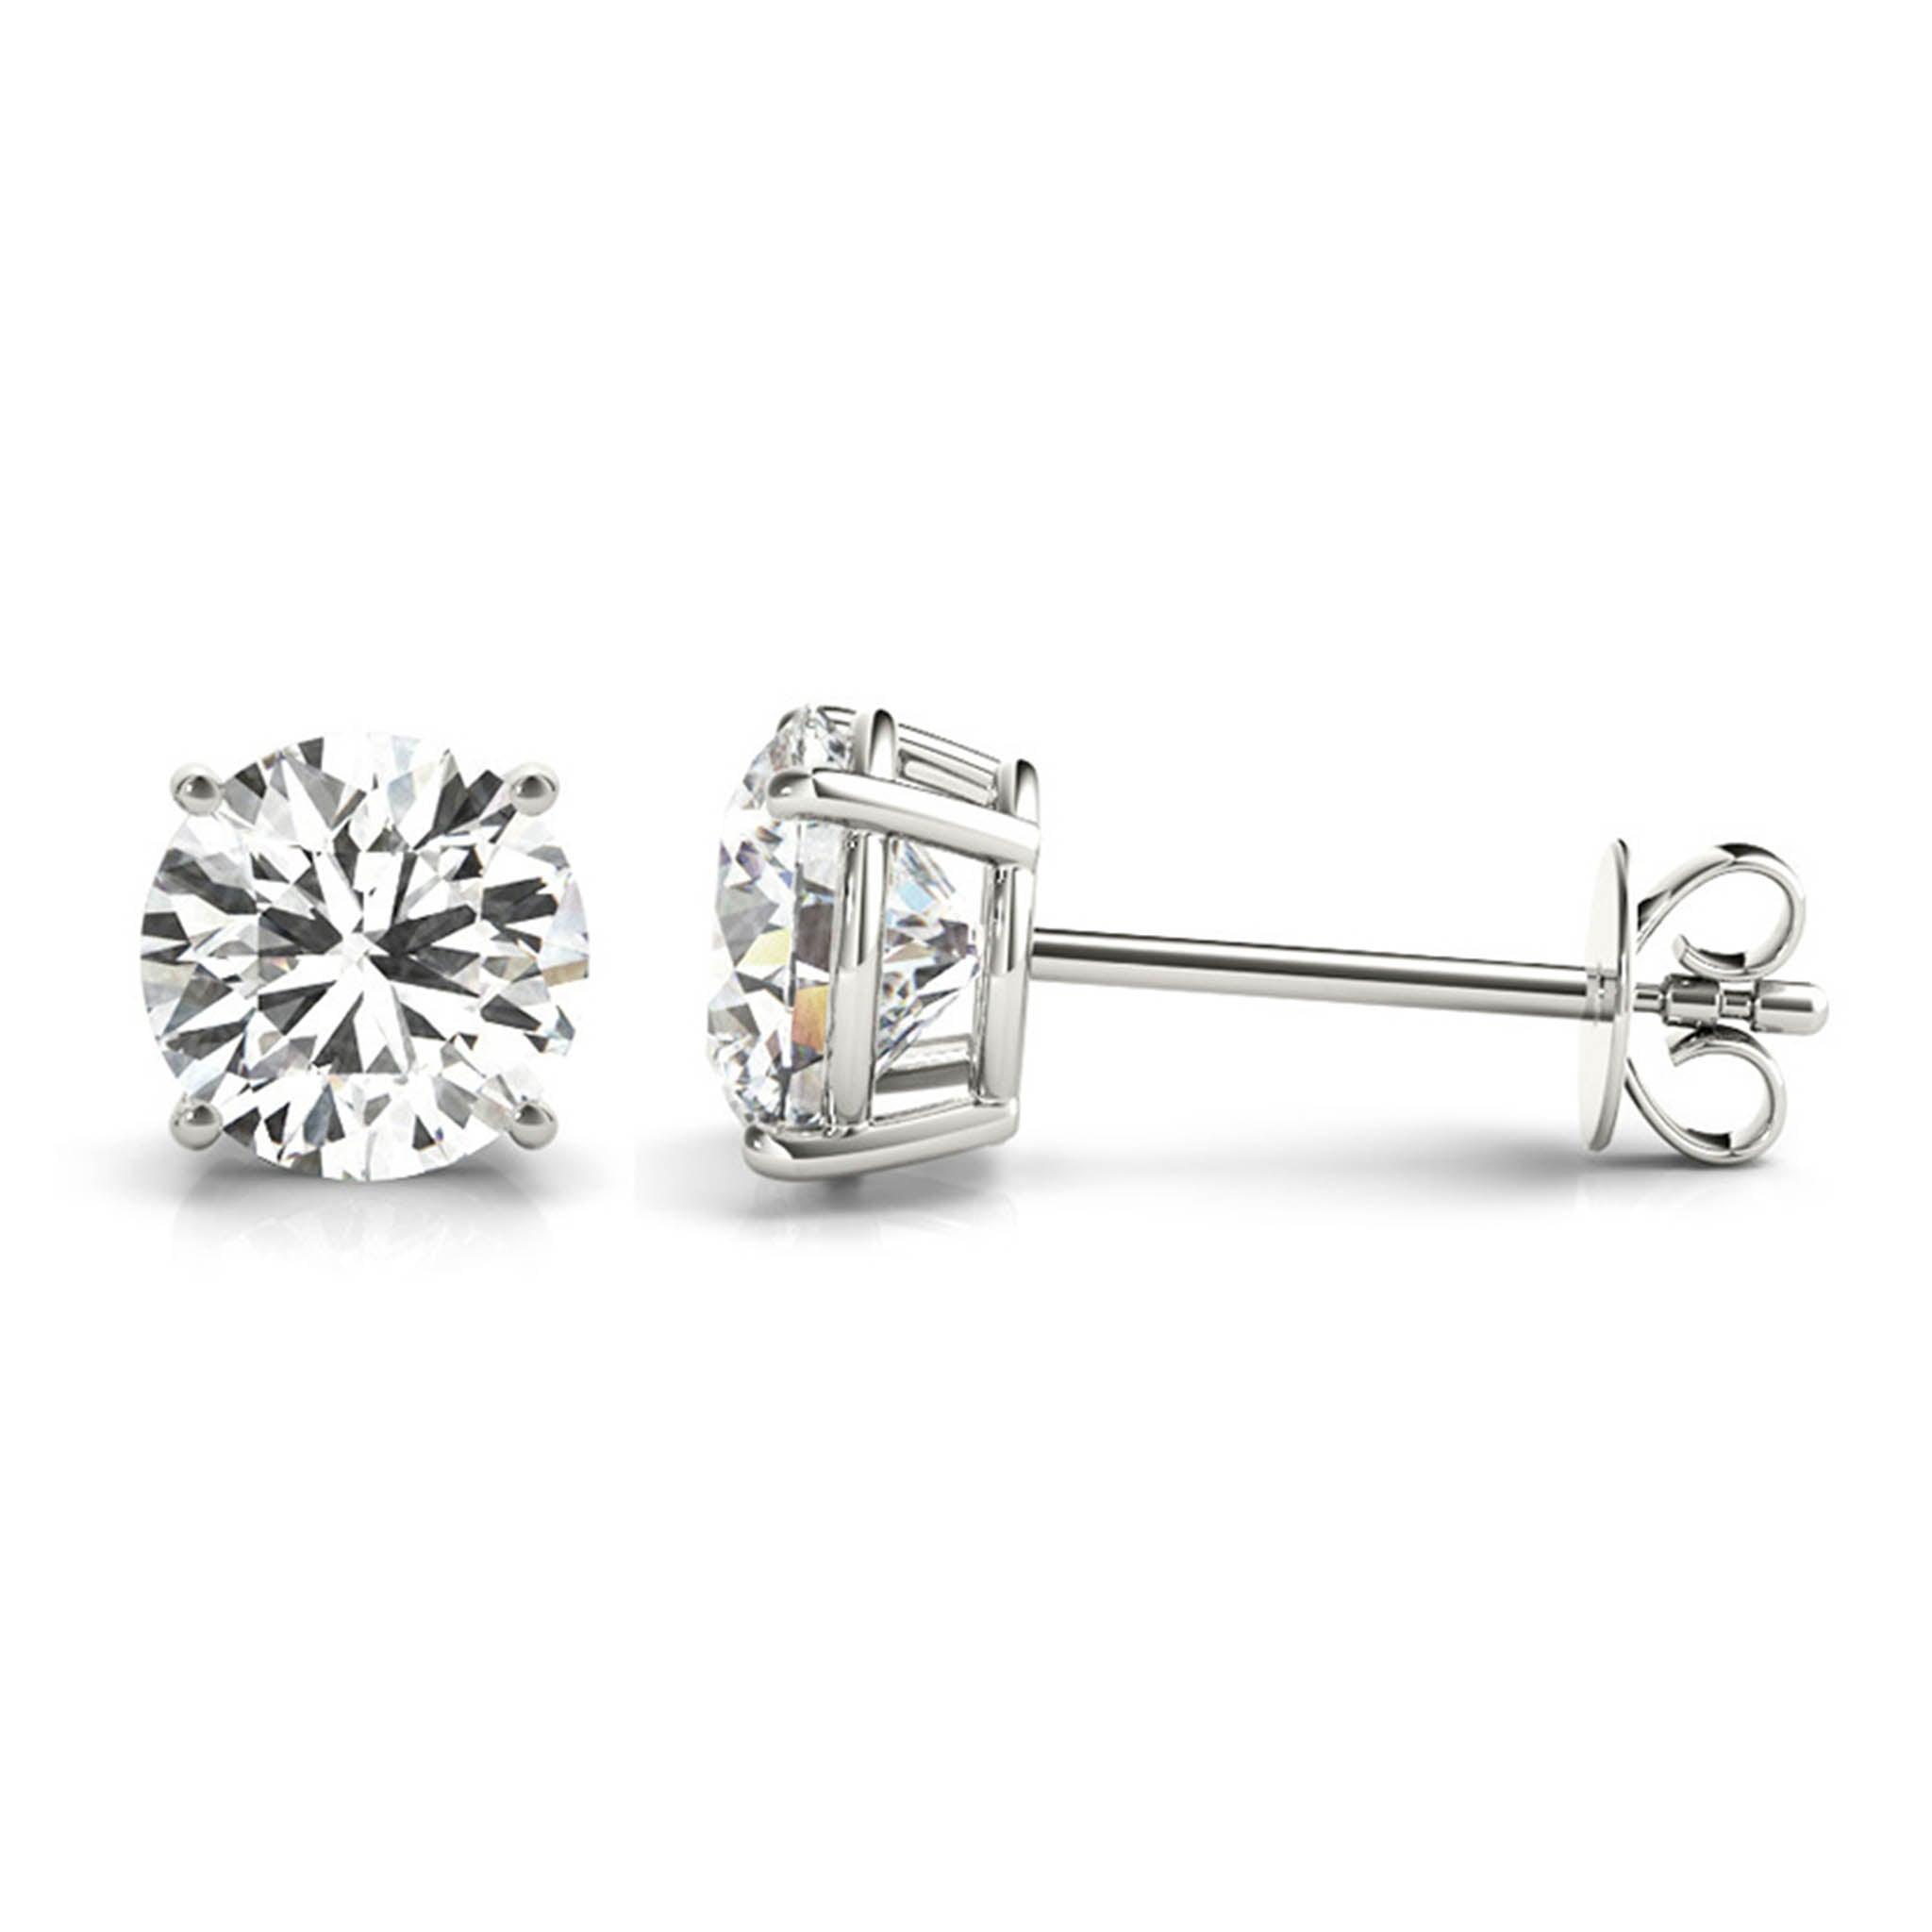 Zoey Lab Grown Diamond Ear Studs / Earrings.  Total diamond weight 0.75 carats / 3/4 carat.  4 claw setting. 14ct white gold version. 